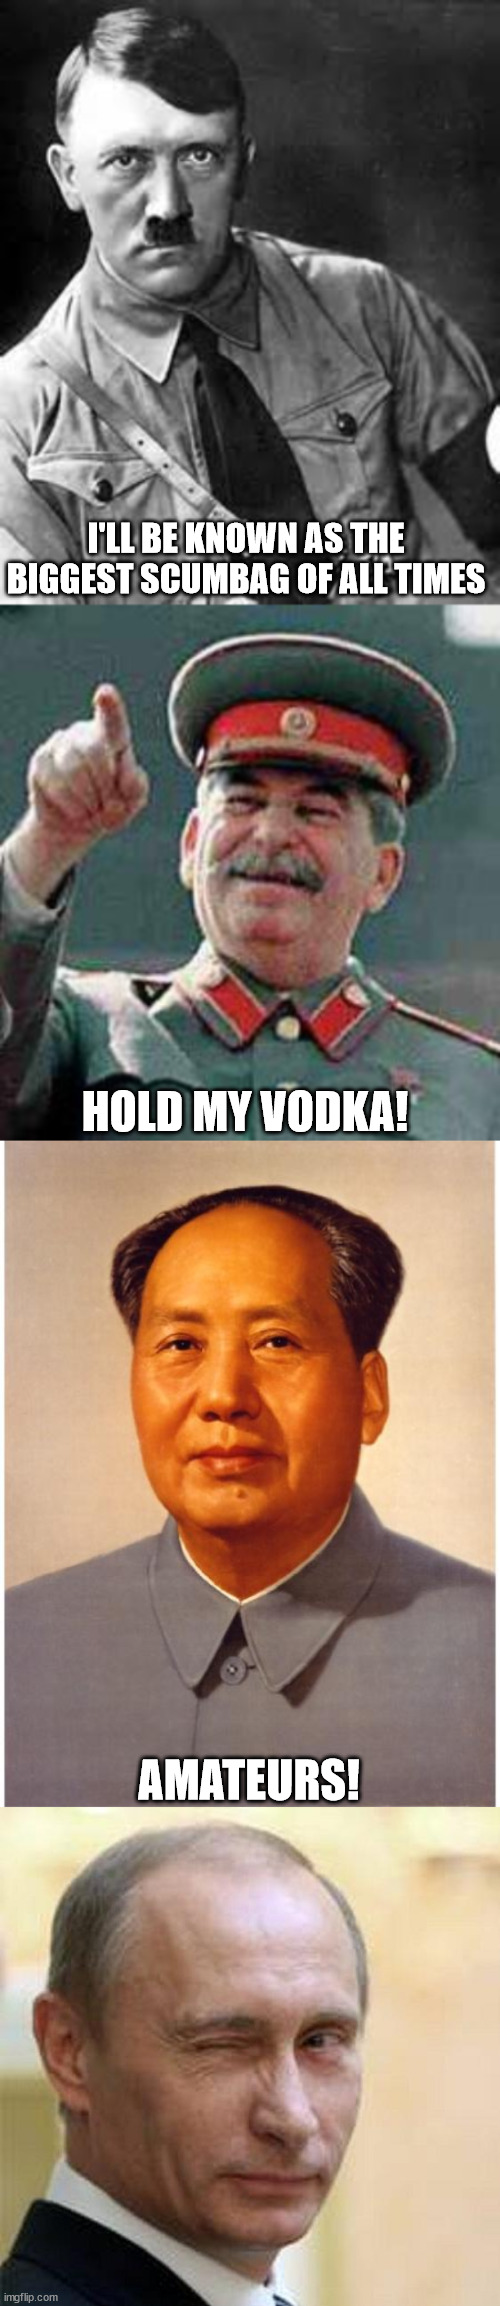 You'd think it was a contest |  I'LL BE KNOWN AS THE BIGGEST SCUMBAG OF ALL TIMES; HOLD MY VODKA! AMATEURS! | image tagged in adolf hitler,stalin says,chairman mao,putin winking | made w/ Imgflip meme maker